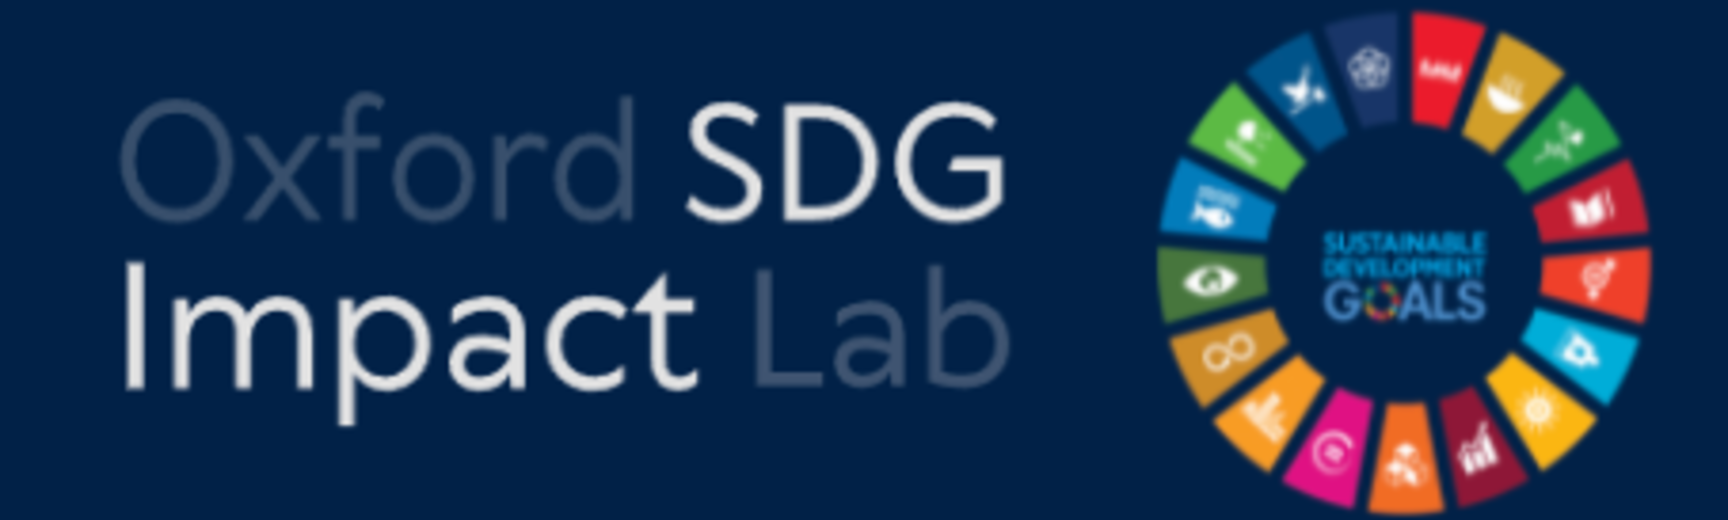 Oxford SDG Impact Lab in light text against a dark blue background and the UN SDGs logo of 17 brightly-coloured segments